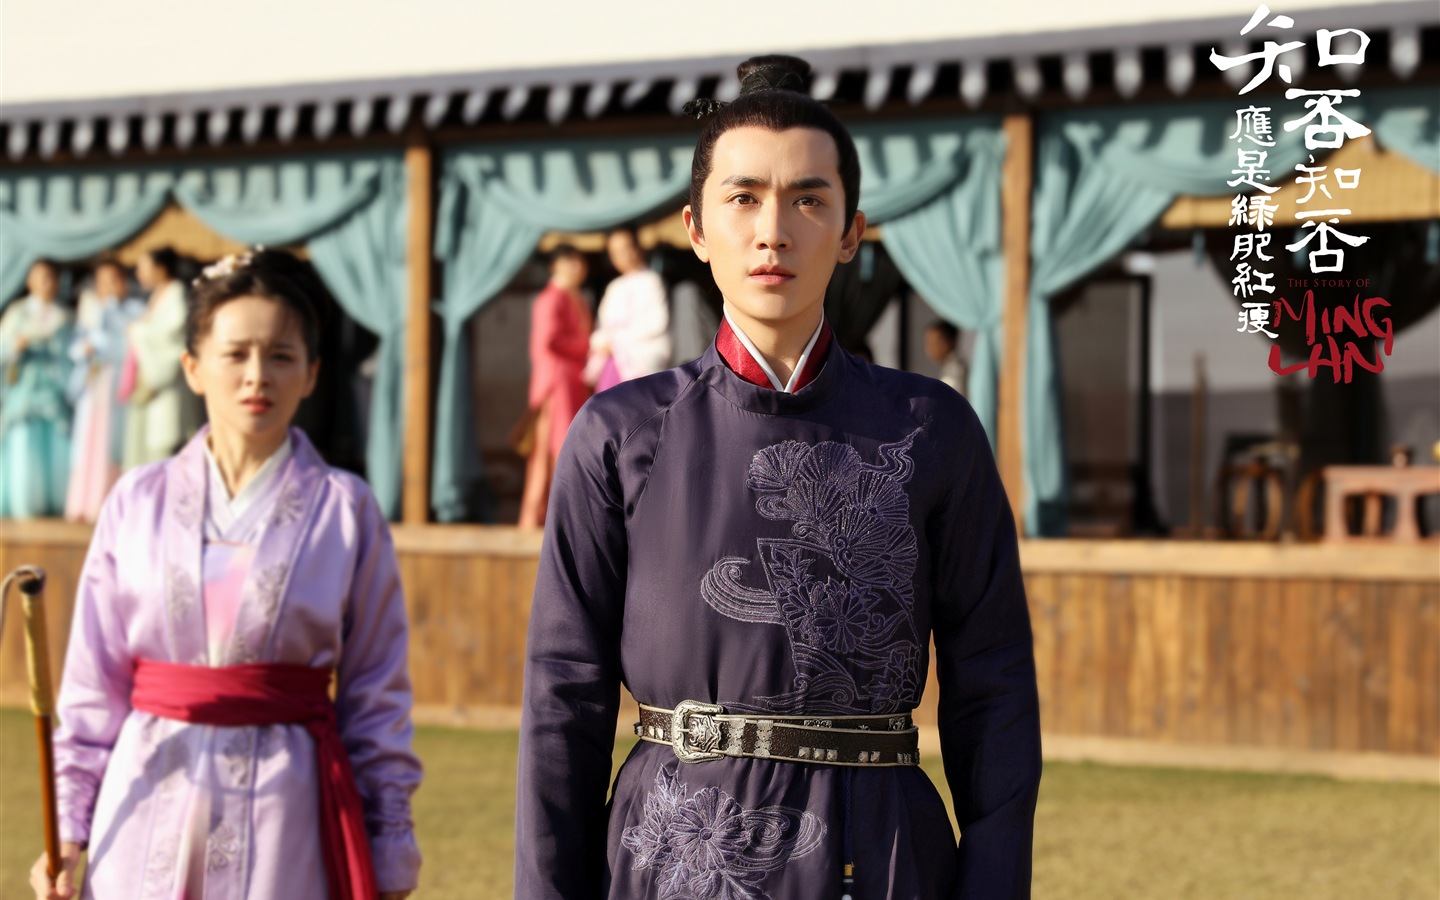 The Story Of MingLan, TV series HD wallpapers #38 - 1440x900